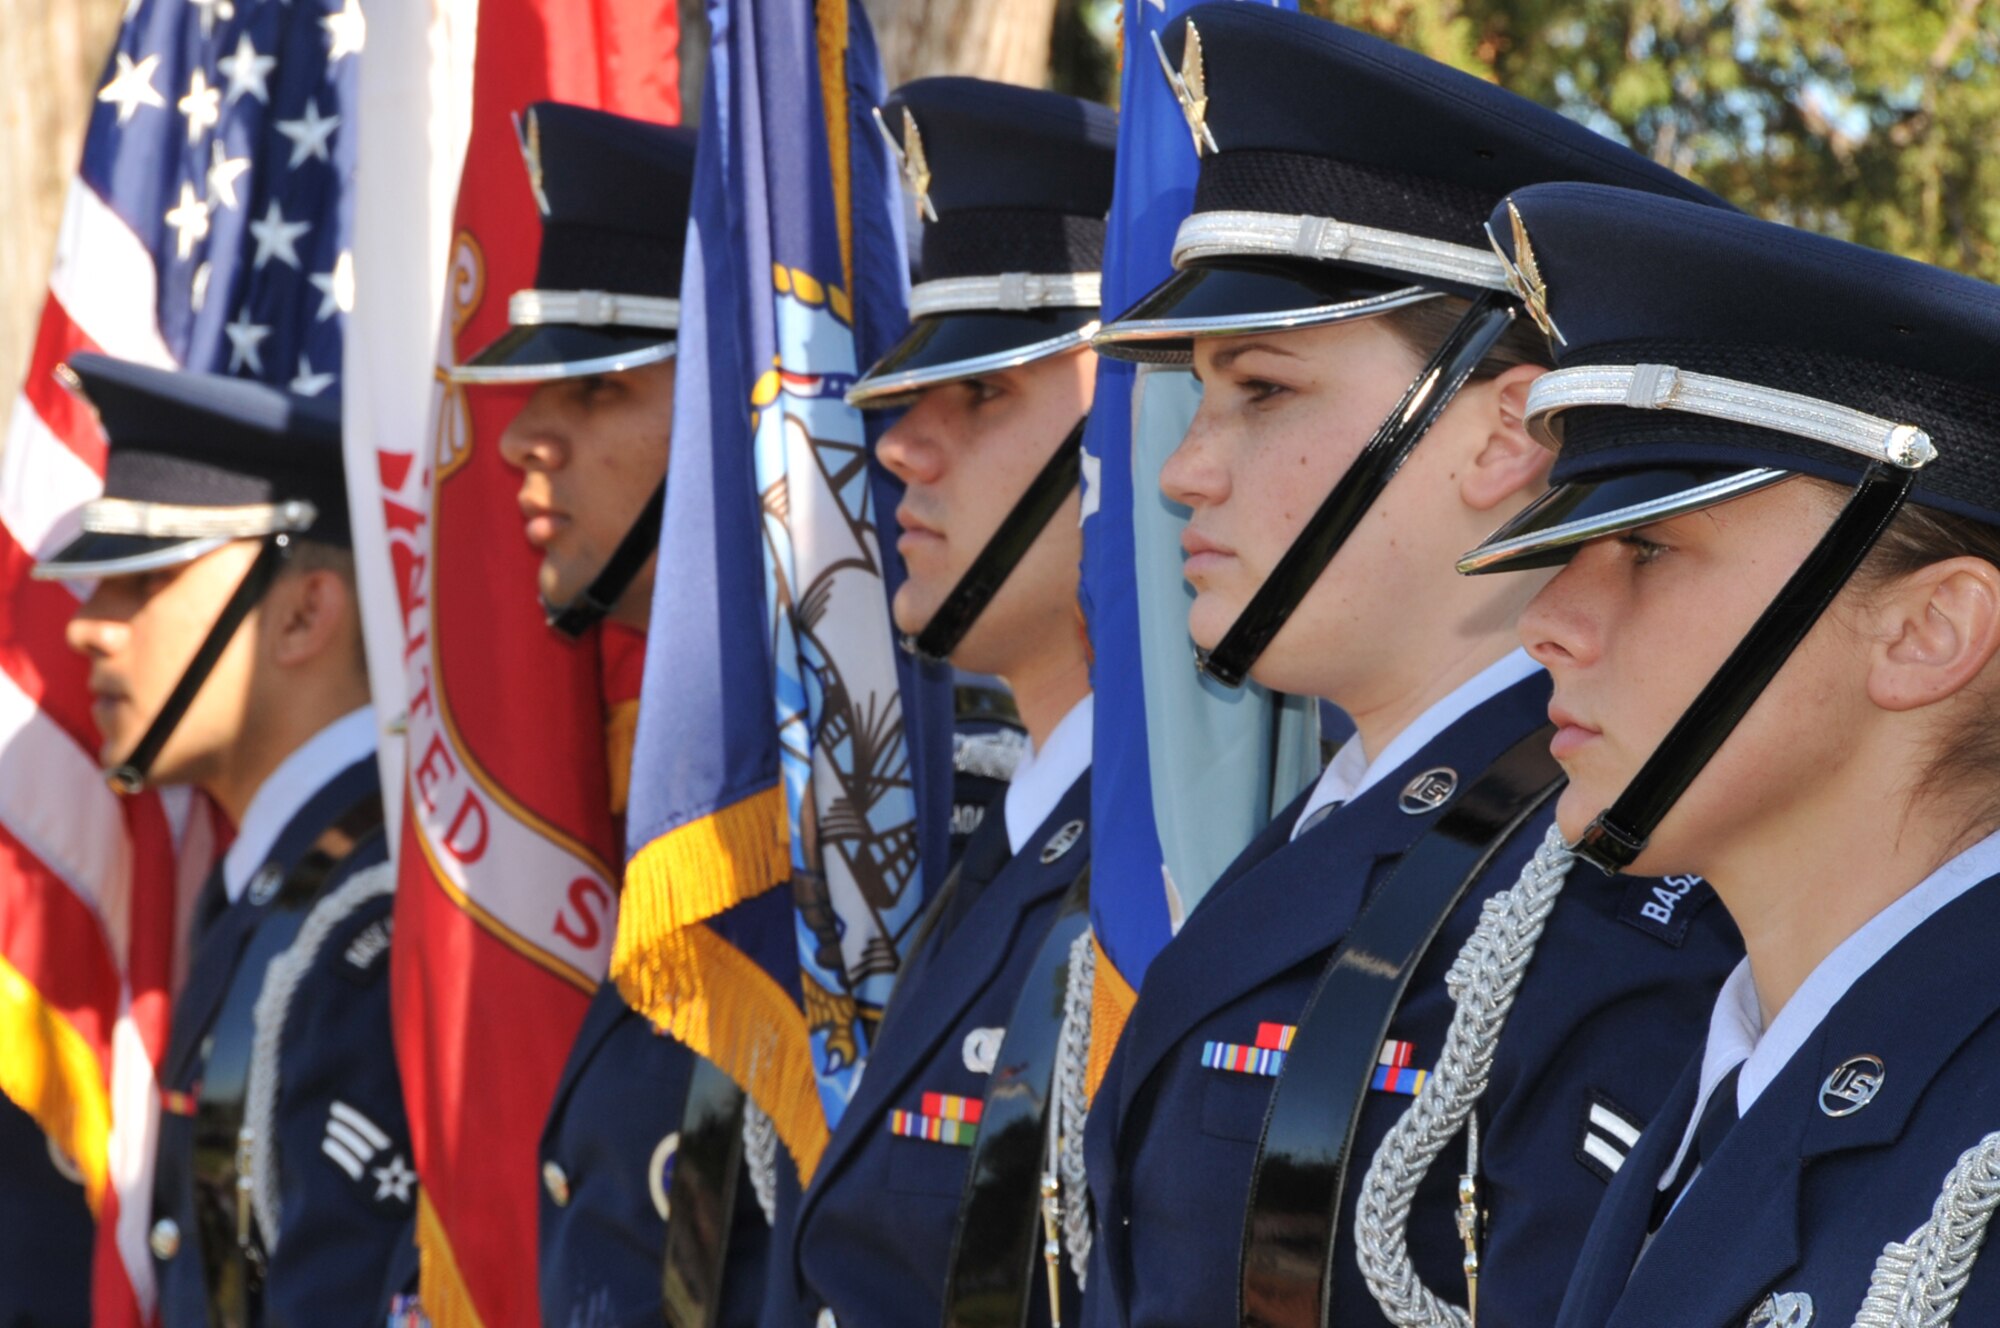 OFFUTT AIR FORCE BASE, Neb. -- Members of the Offutt Honor Guard present the colors during Offutt's Memorial Day ceremony at the base cemetery May 31.  More than 100 people attended the annual memorial service. U.S. Air Force Photo by D.P. Heard